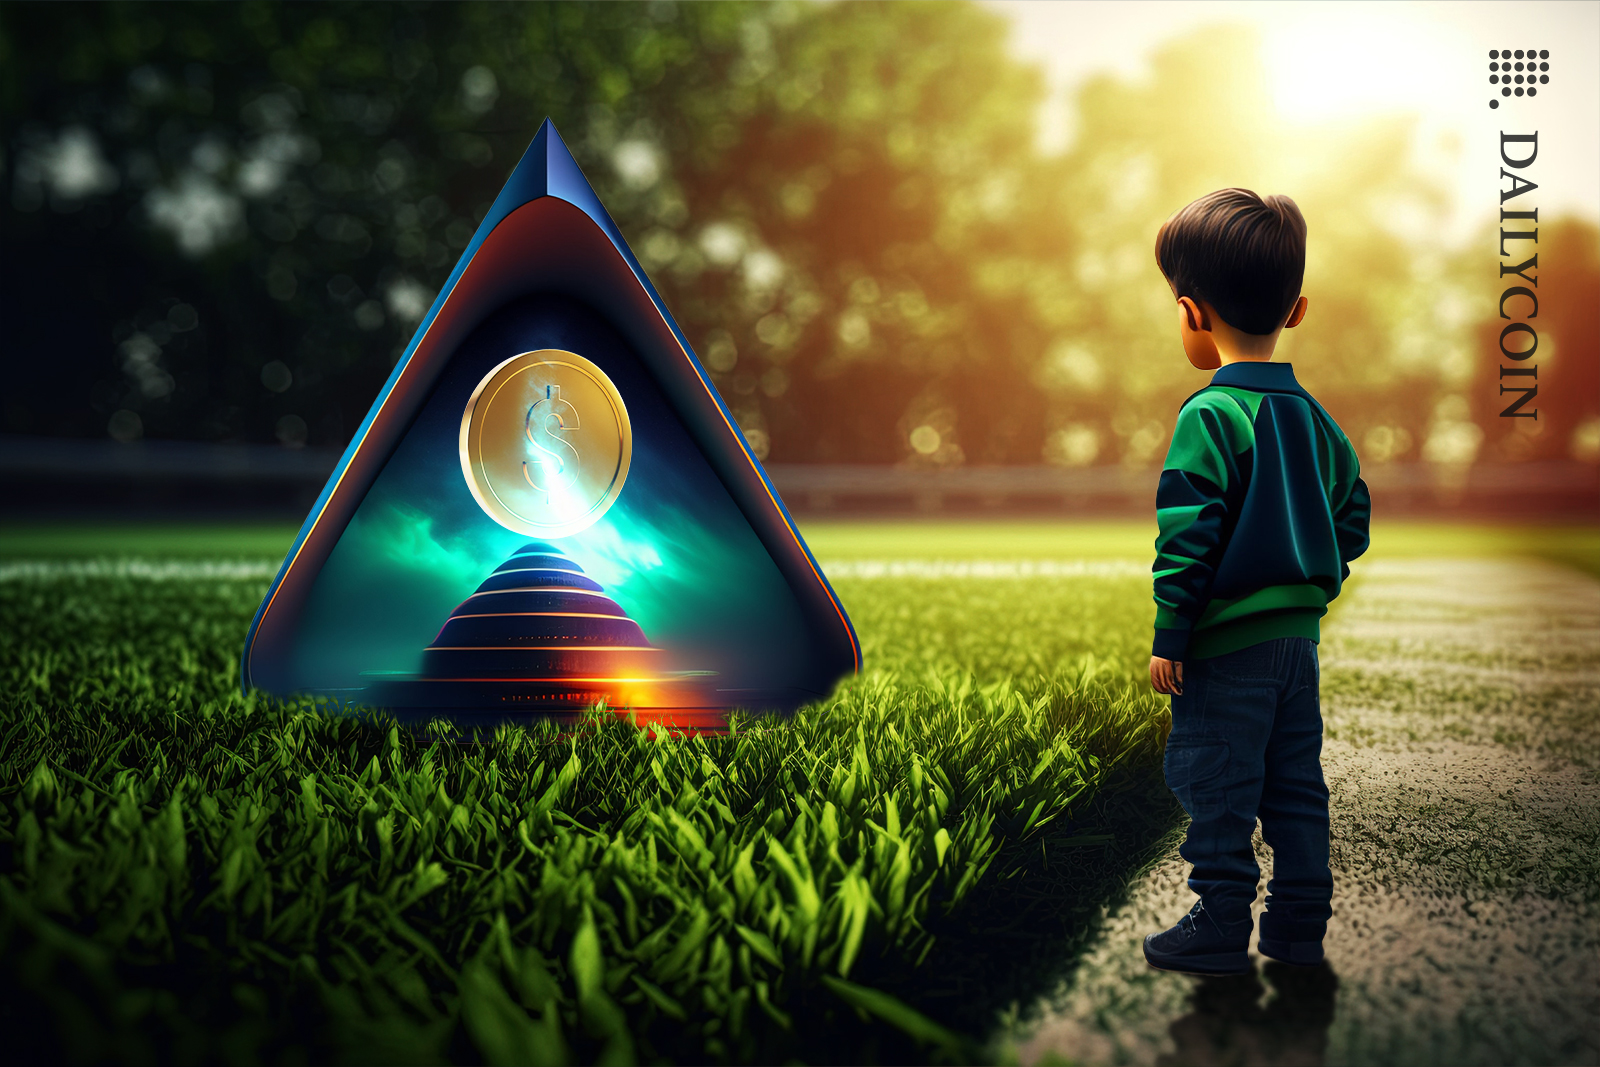 Little boy in a park with his back turned discovered a magic triangle with a dollar coin inside.